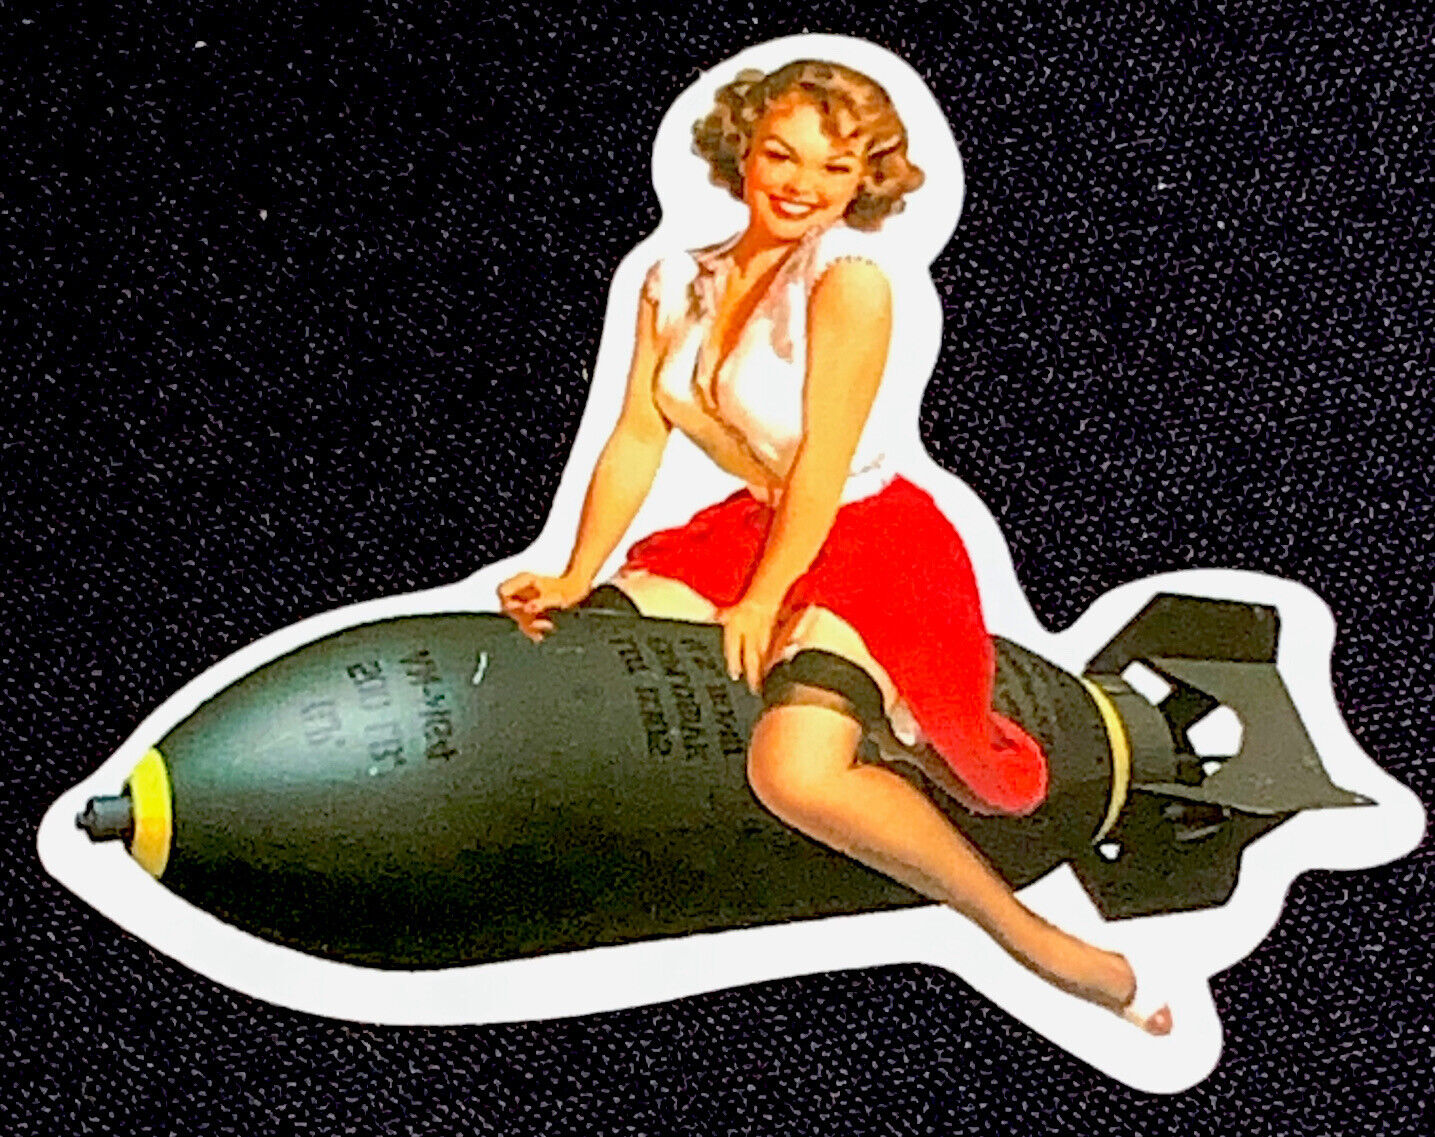 SEXY PINUP GIRL STICKER ✨💋🍒👄🍒💋✨2 3/4” X  2 1/4”✨VERY CUTE❤️‍🔥✨AWESOME✨